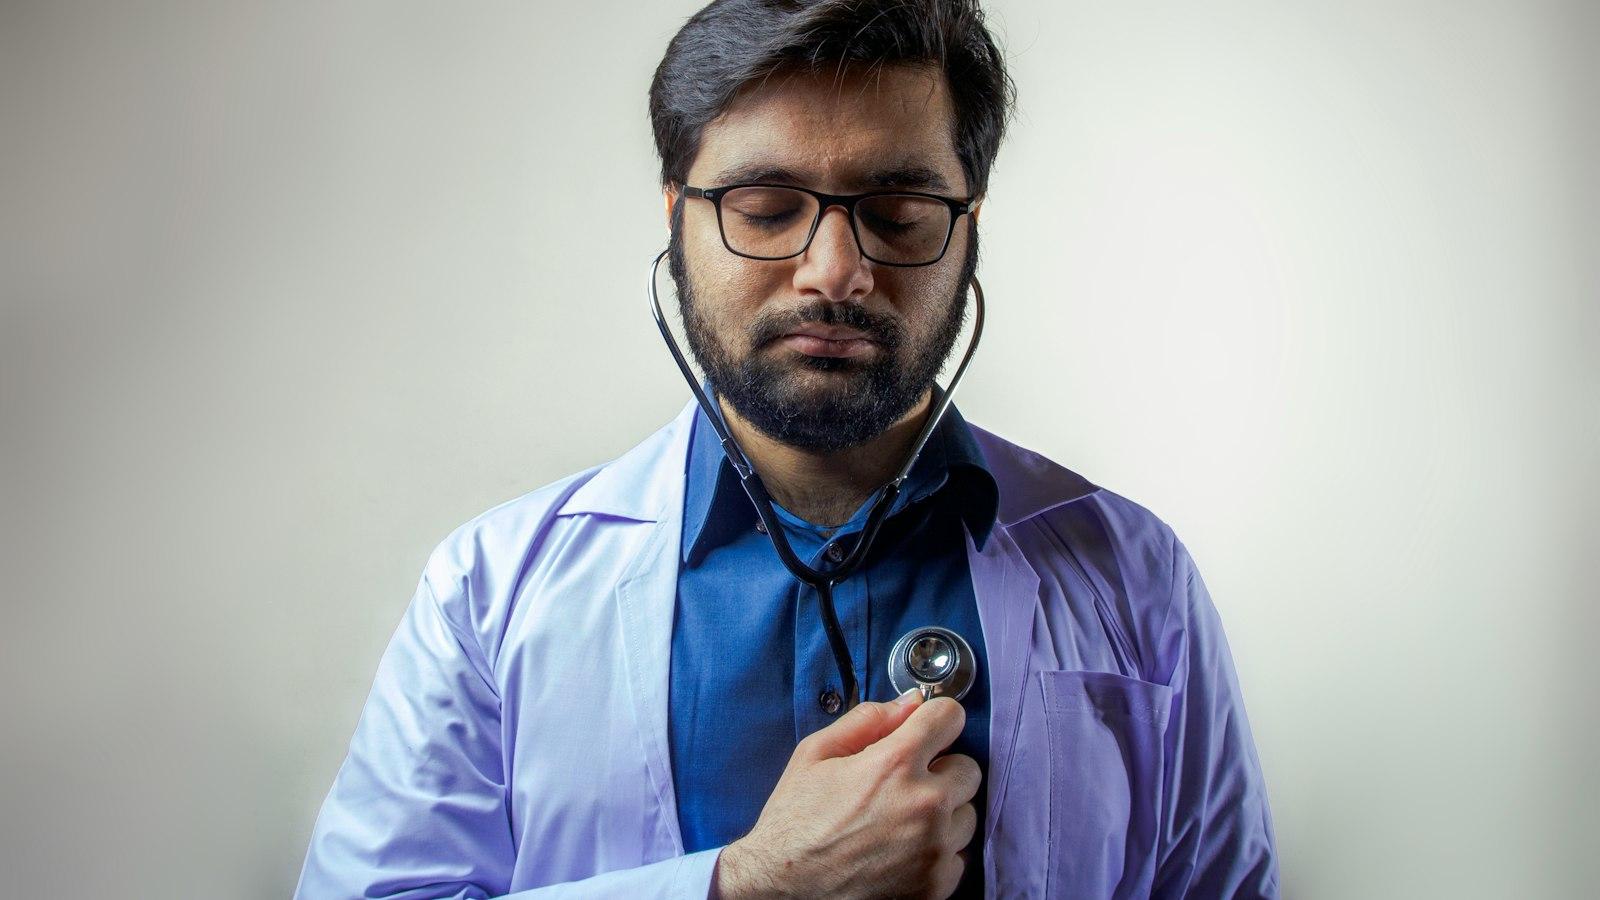 Proper Techniques for Using a Stethoscope